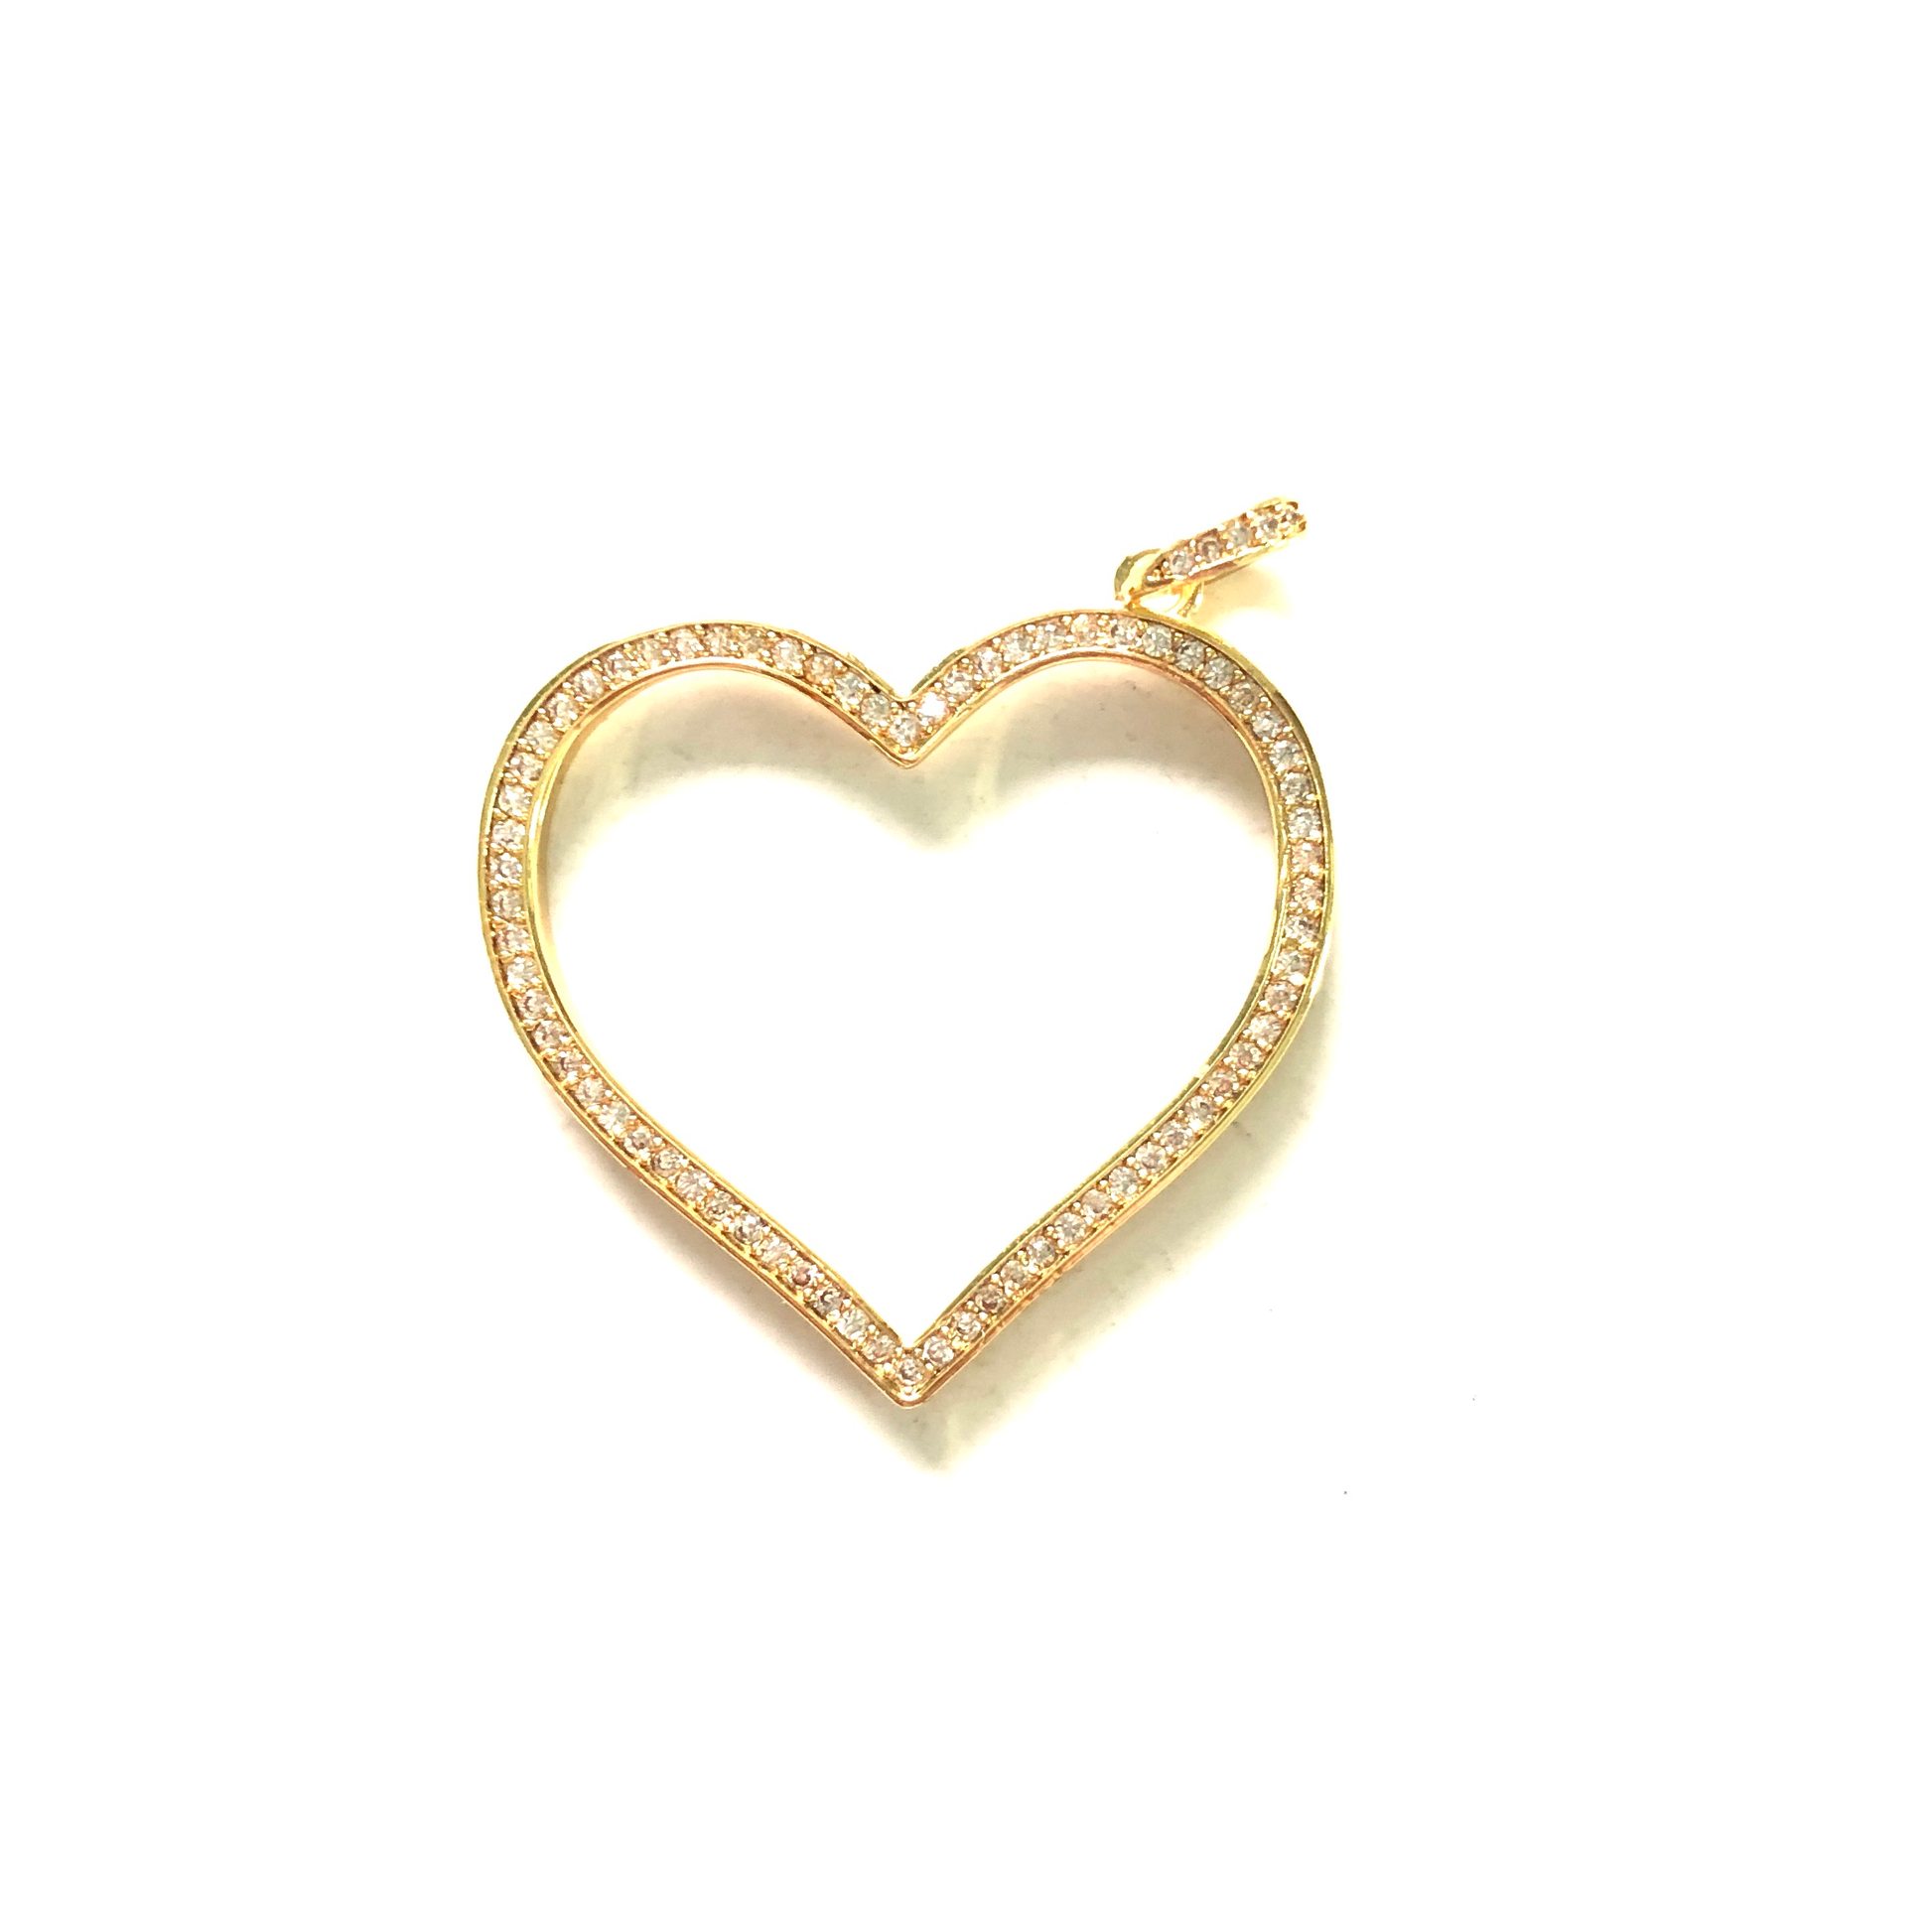 10pcs/lot 32*30mm CZ Paved Heart Charms Gold CZ Paved Charms Hearts Charms Beads Beyond